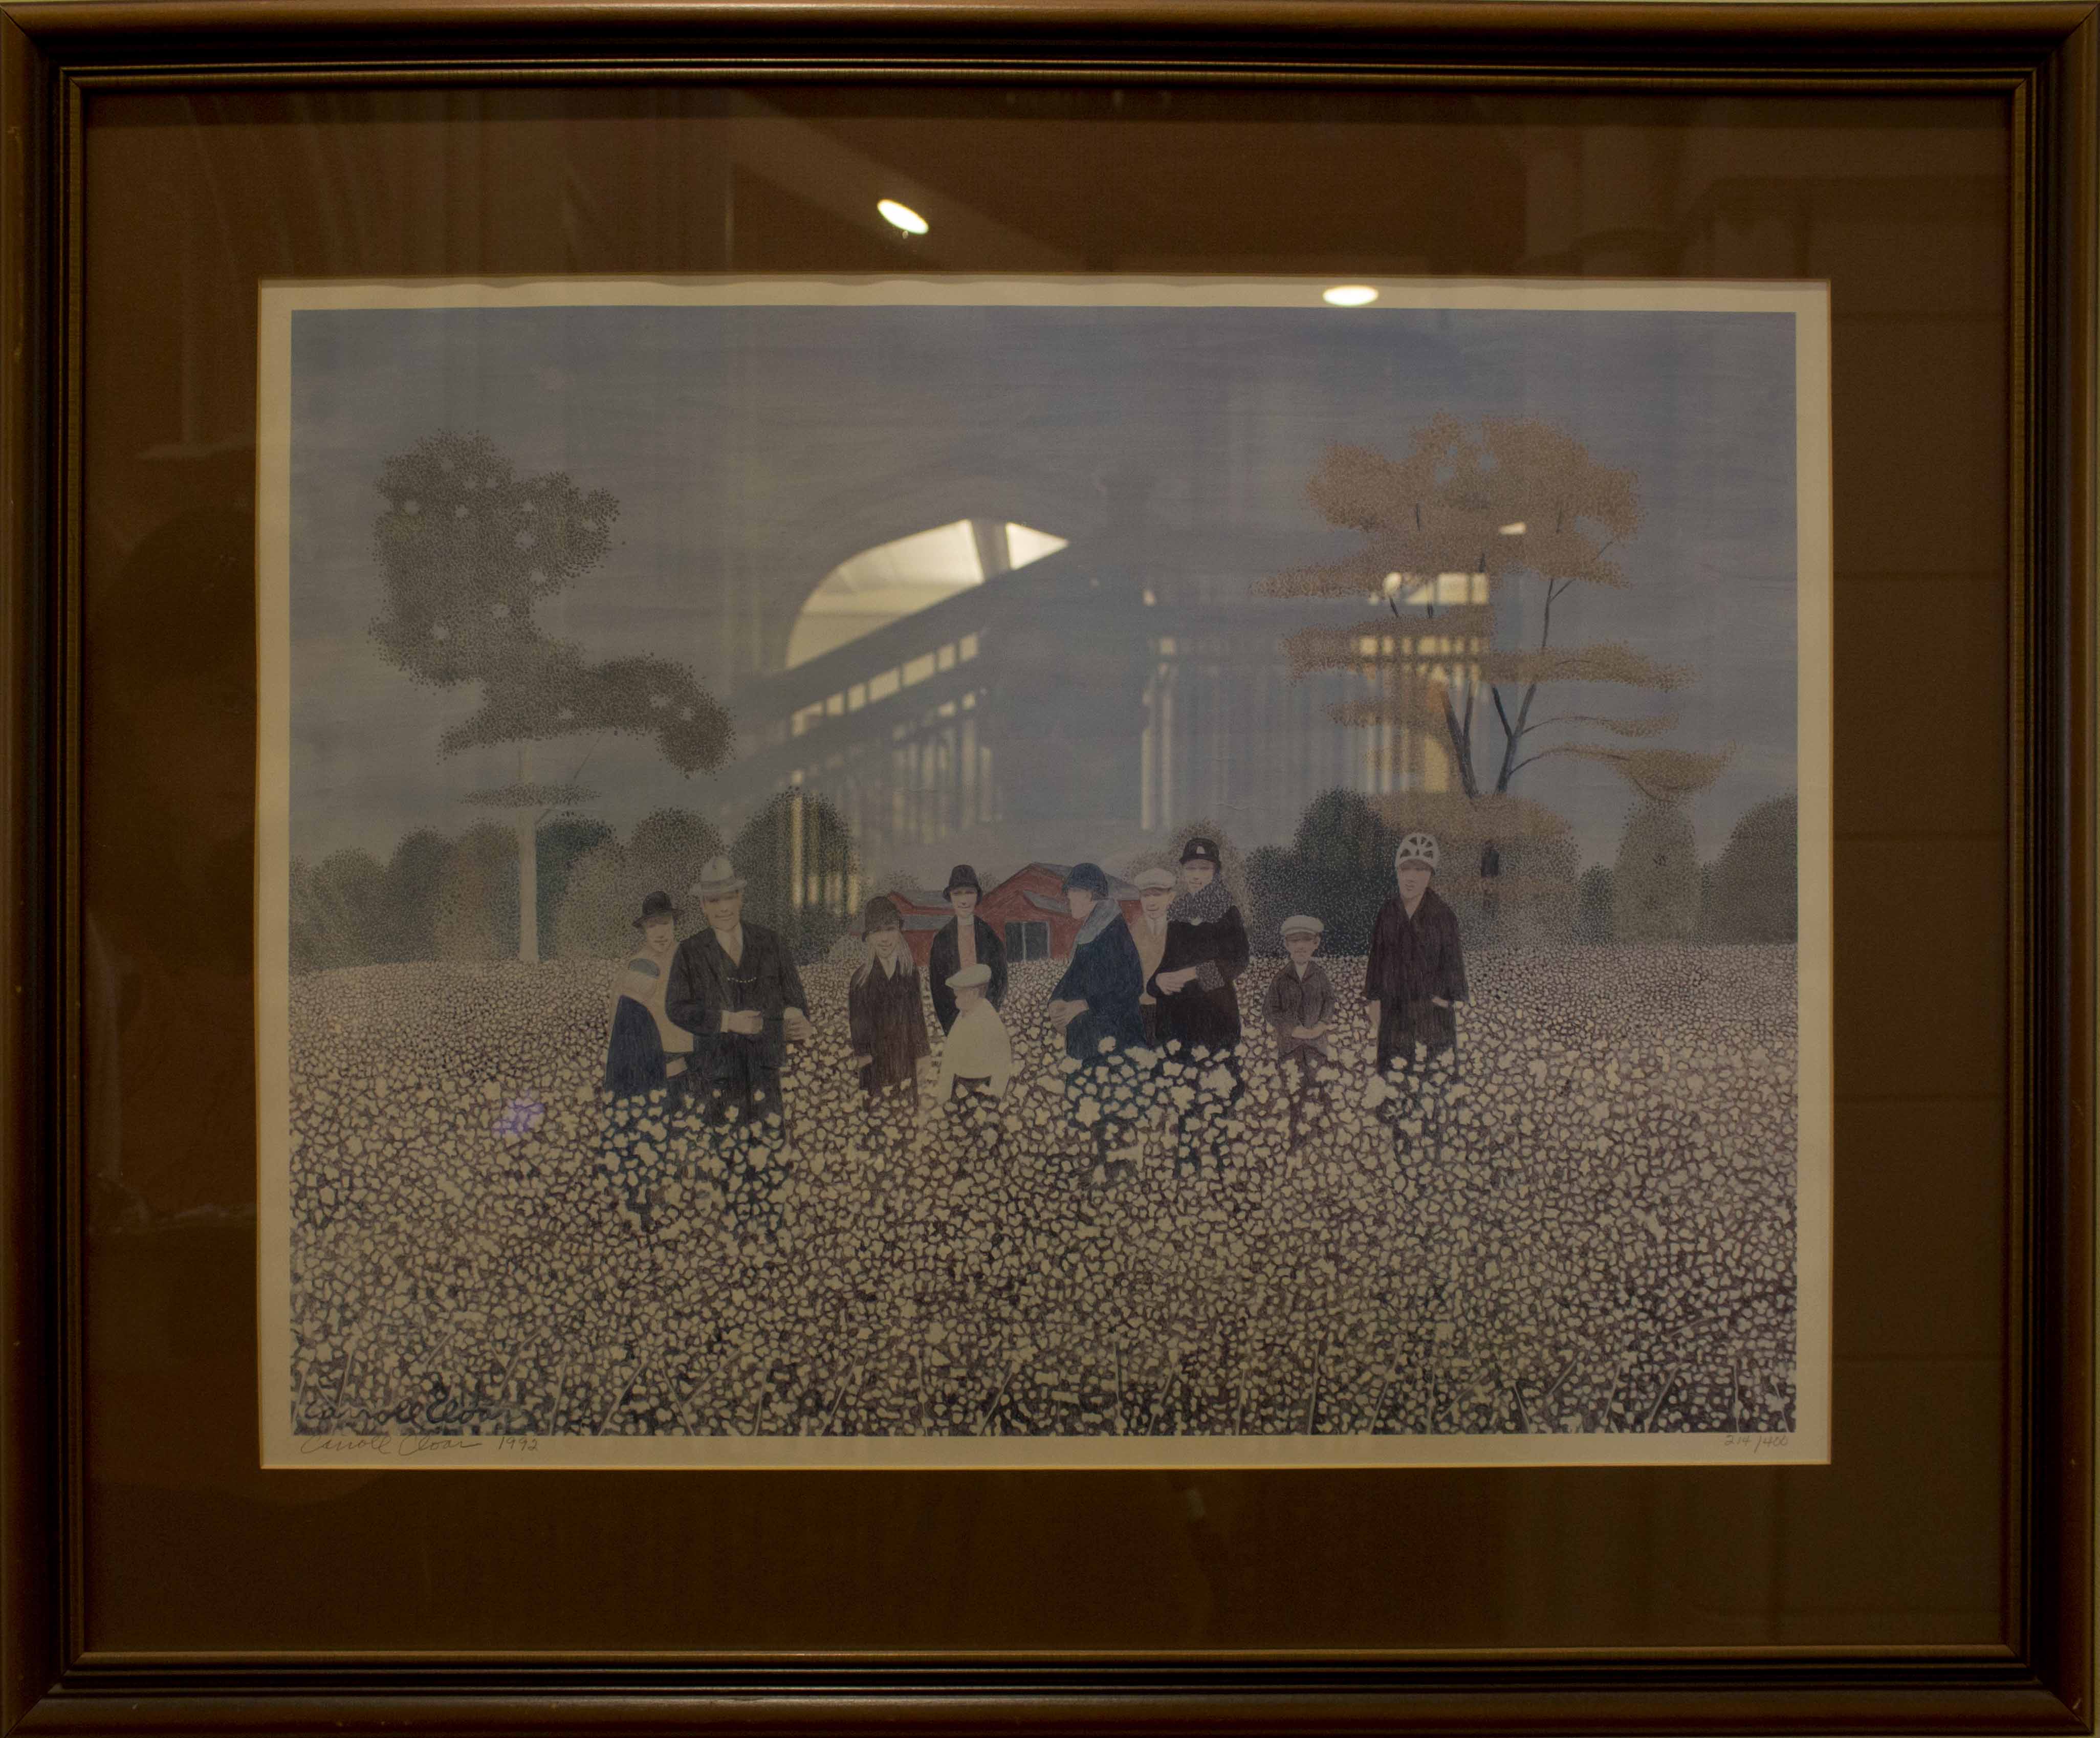 Signed Offset Lithograph of people wearing hats in a cotton field with trees in the background. The piece is mostly in blues, greens, and white.